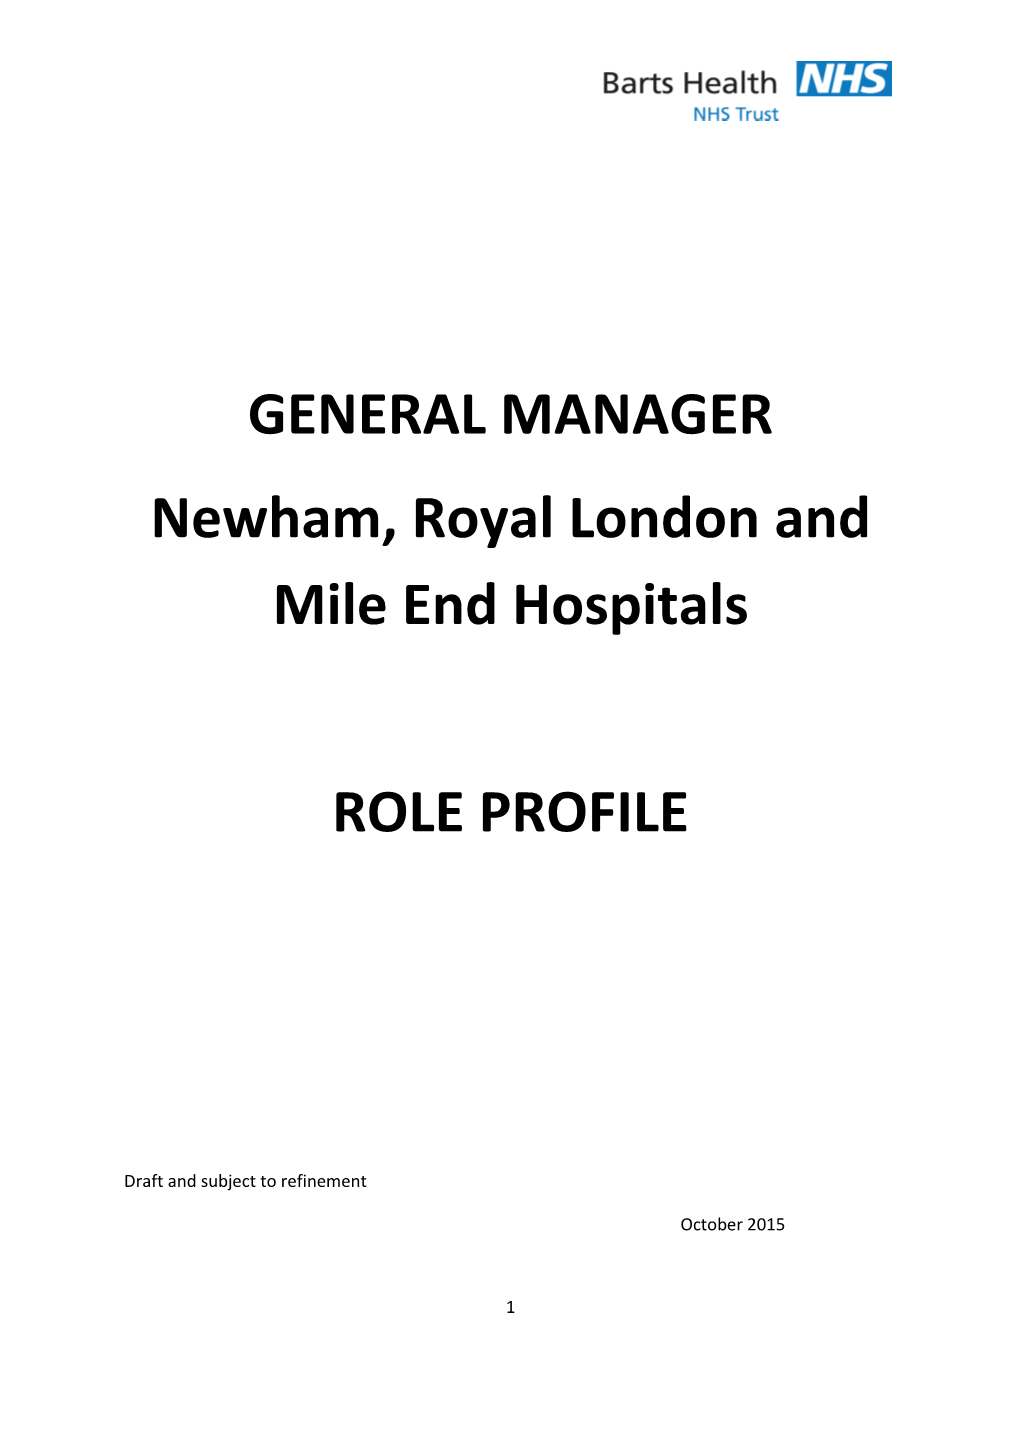 GENERAL MANAGER Newham, Royal London and Mile End Hospitals